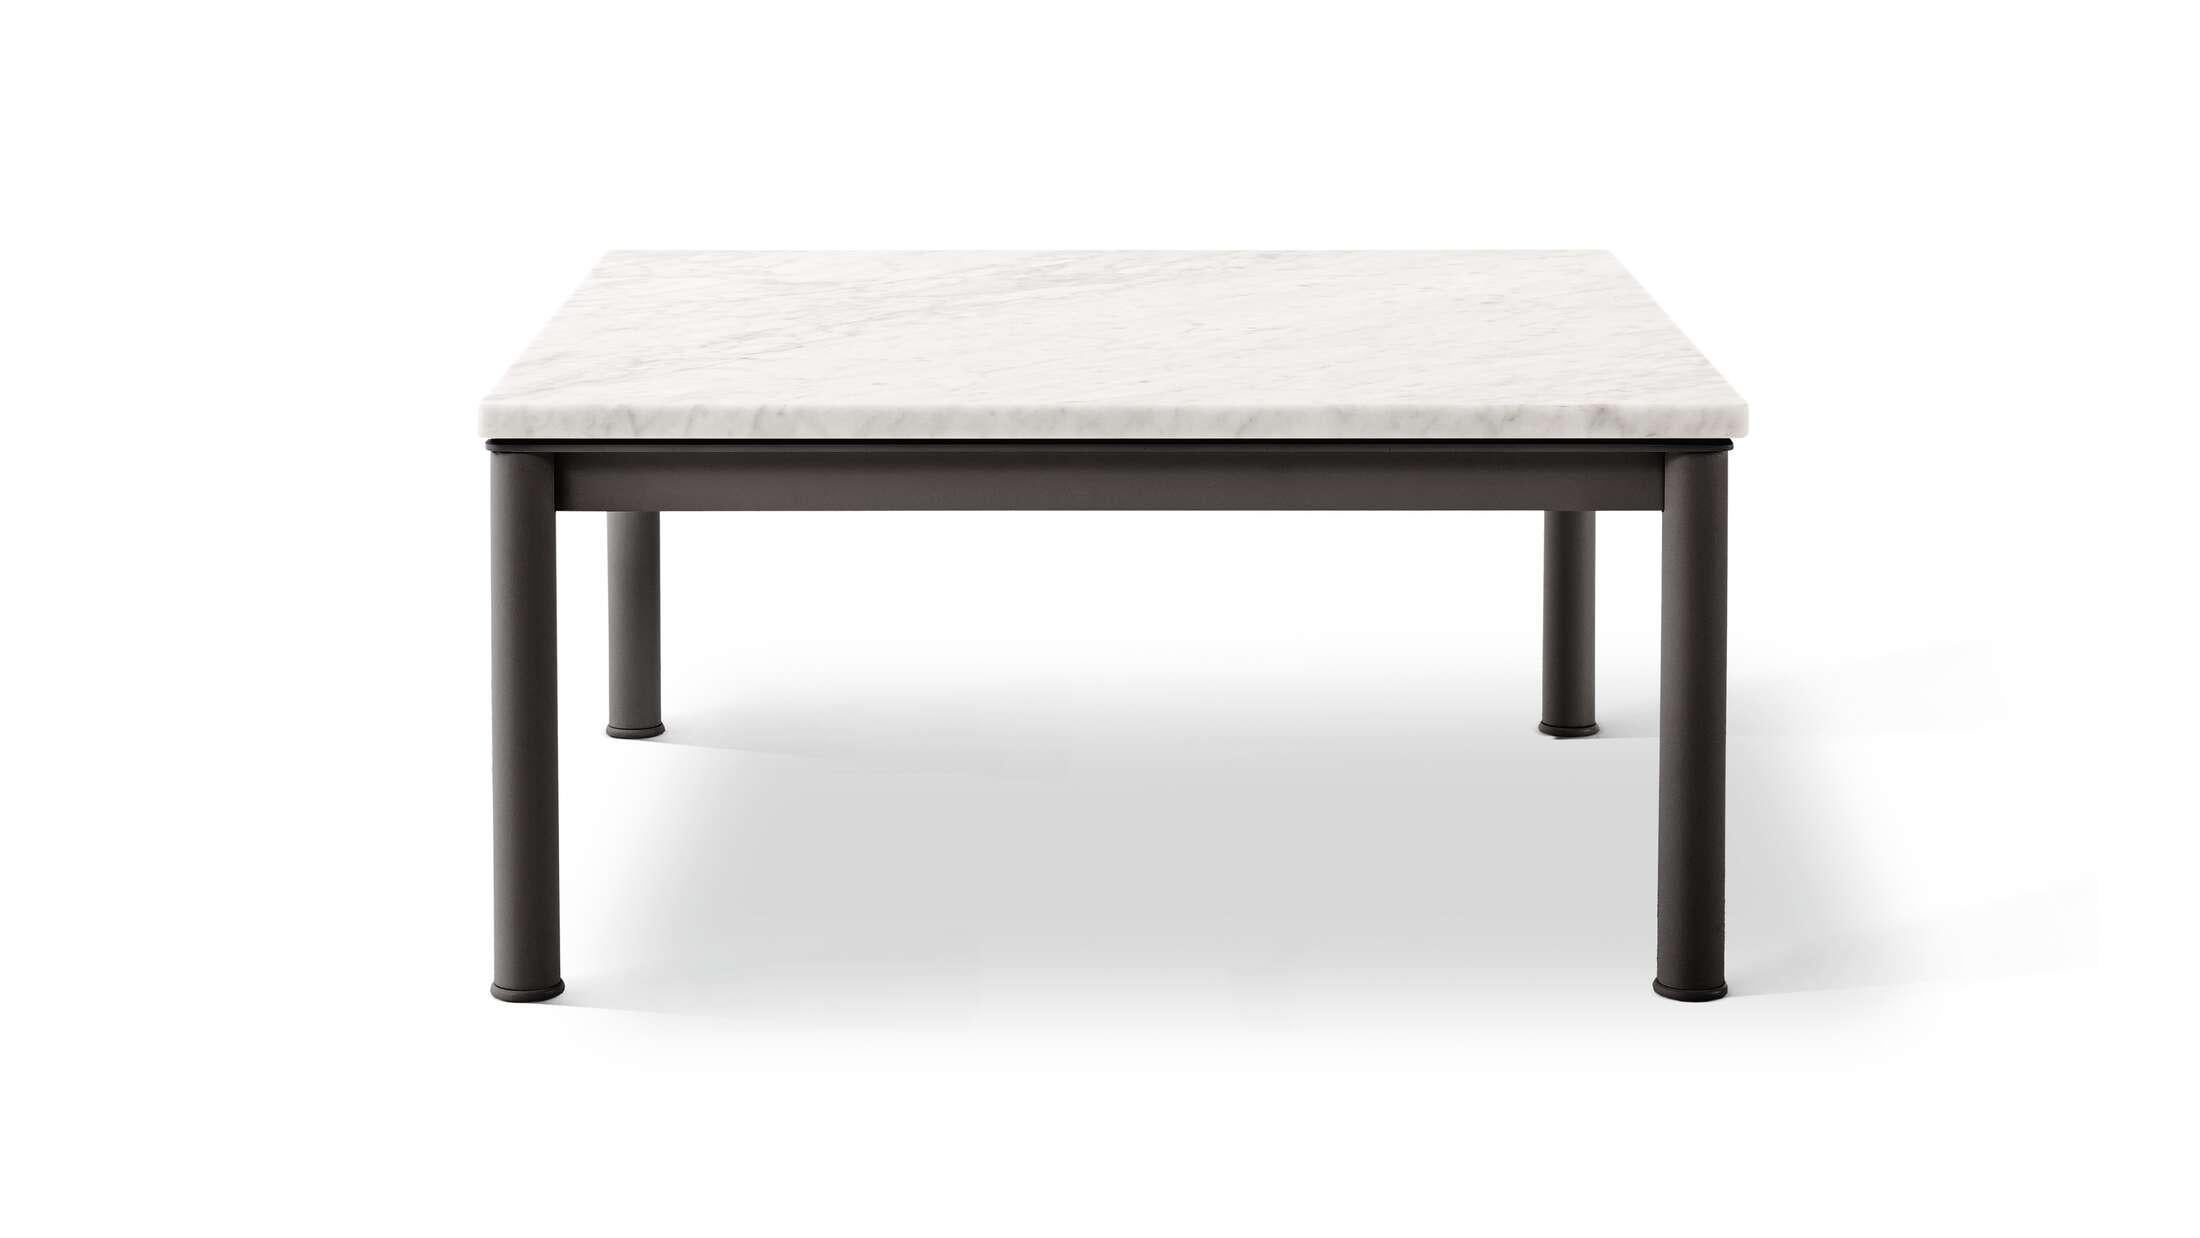 Prices vary dependent on the material and size of the table. The collection includes a dining table as well as low tables, both in a square and rectangular formats. The first picture and pictures 4-6 show an outdoor version of the table. 
 
Designed